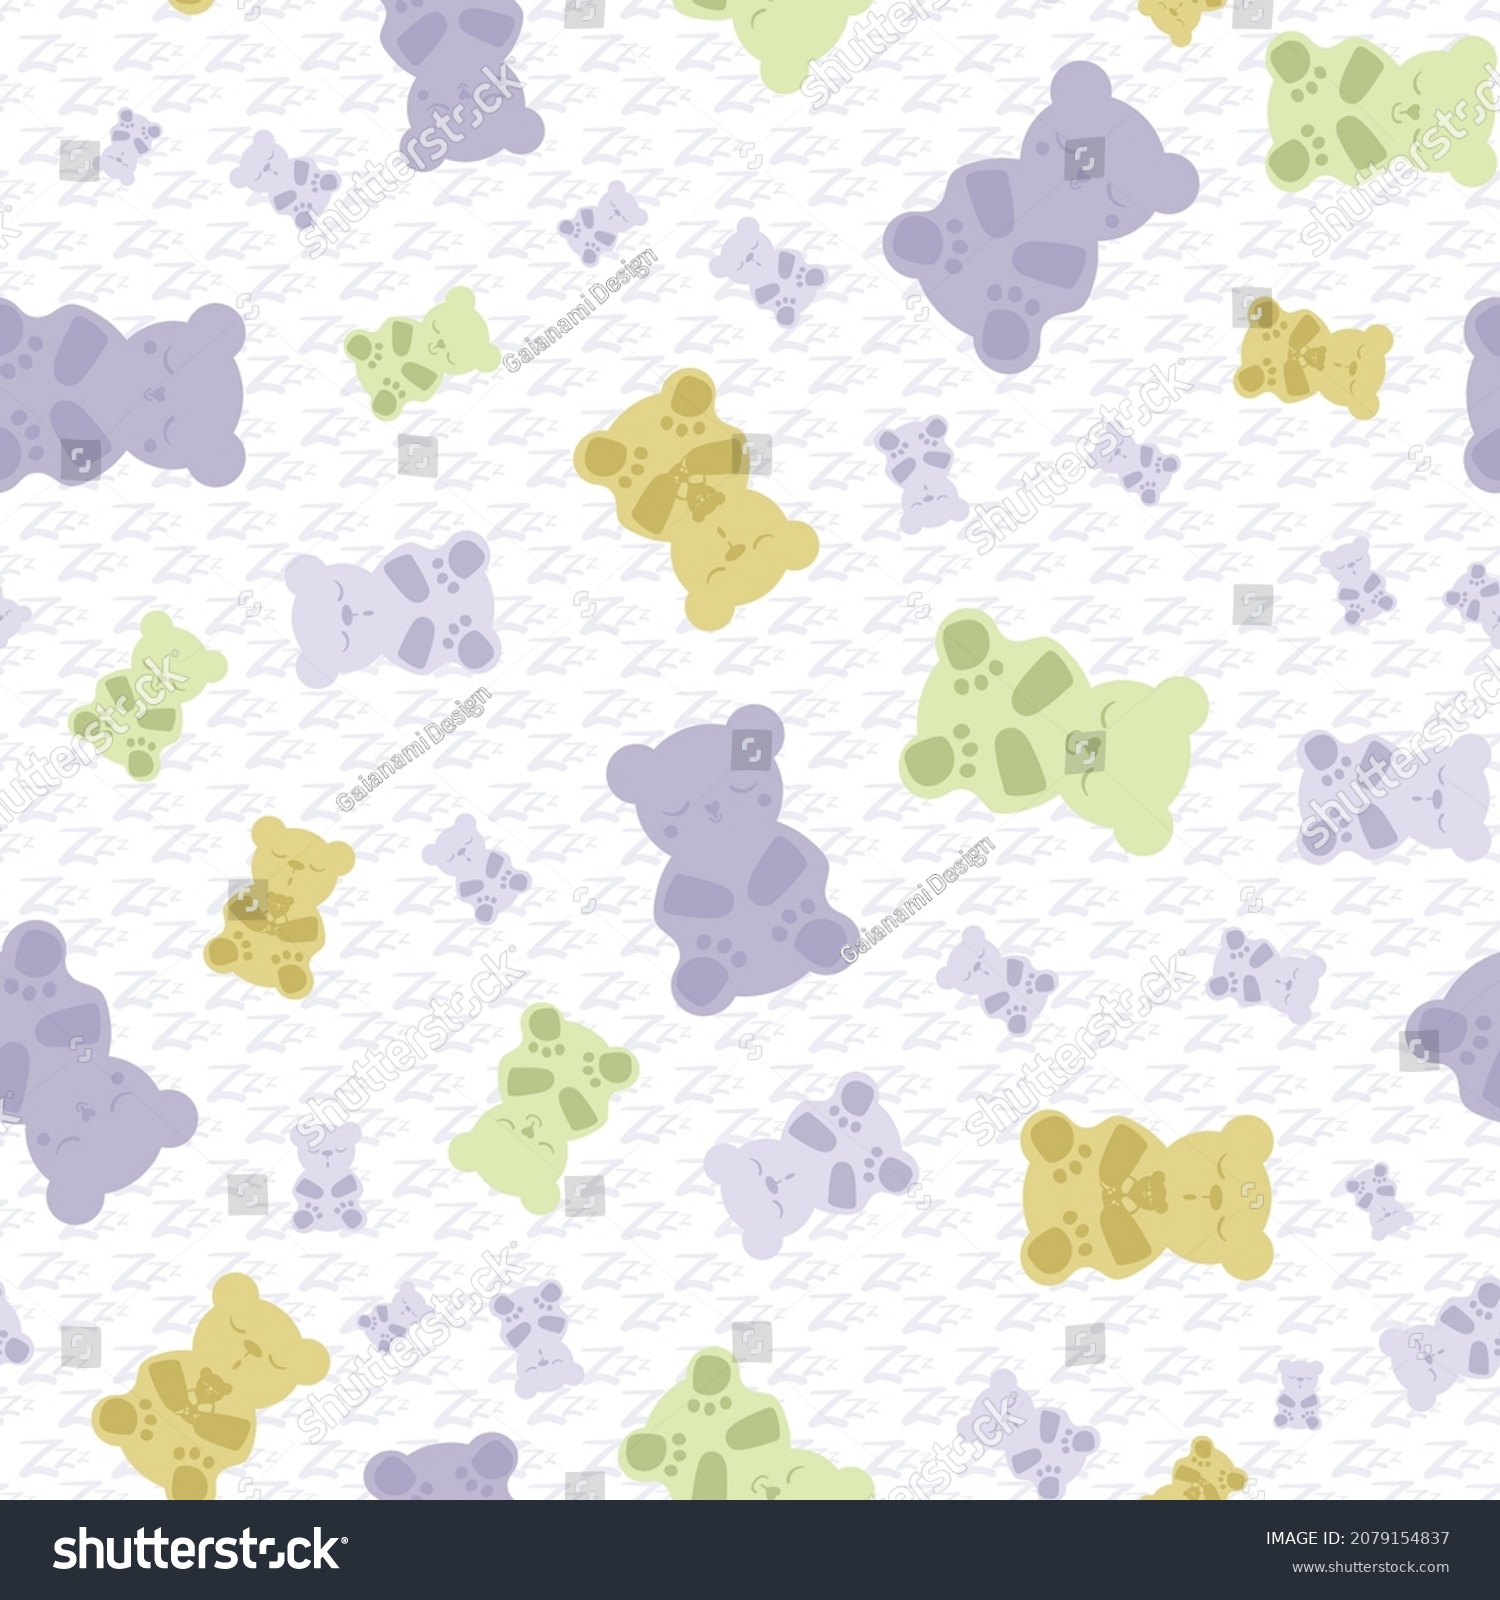 SVG of Sleep gummies vector seamless pattern background. Backdrop with gummy bears in pastel purple, green, white. Cute kawaii style characters for sleeping well, melatonin natural aid and health concept. svg